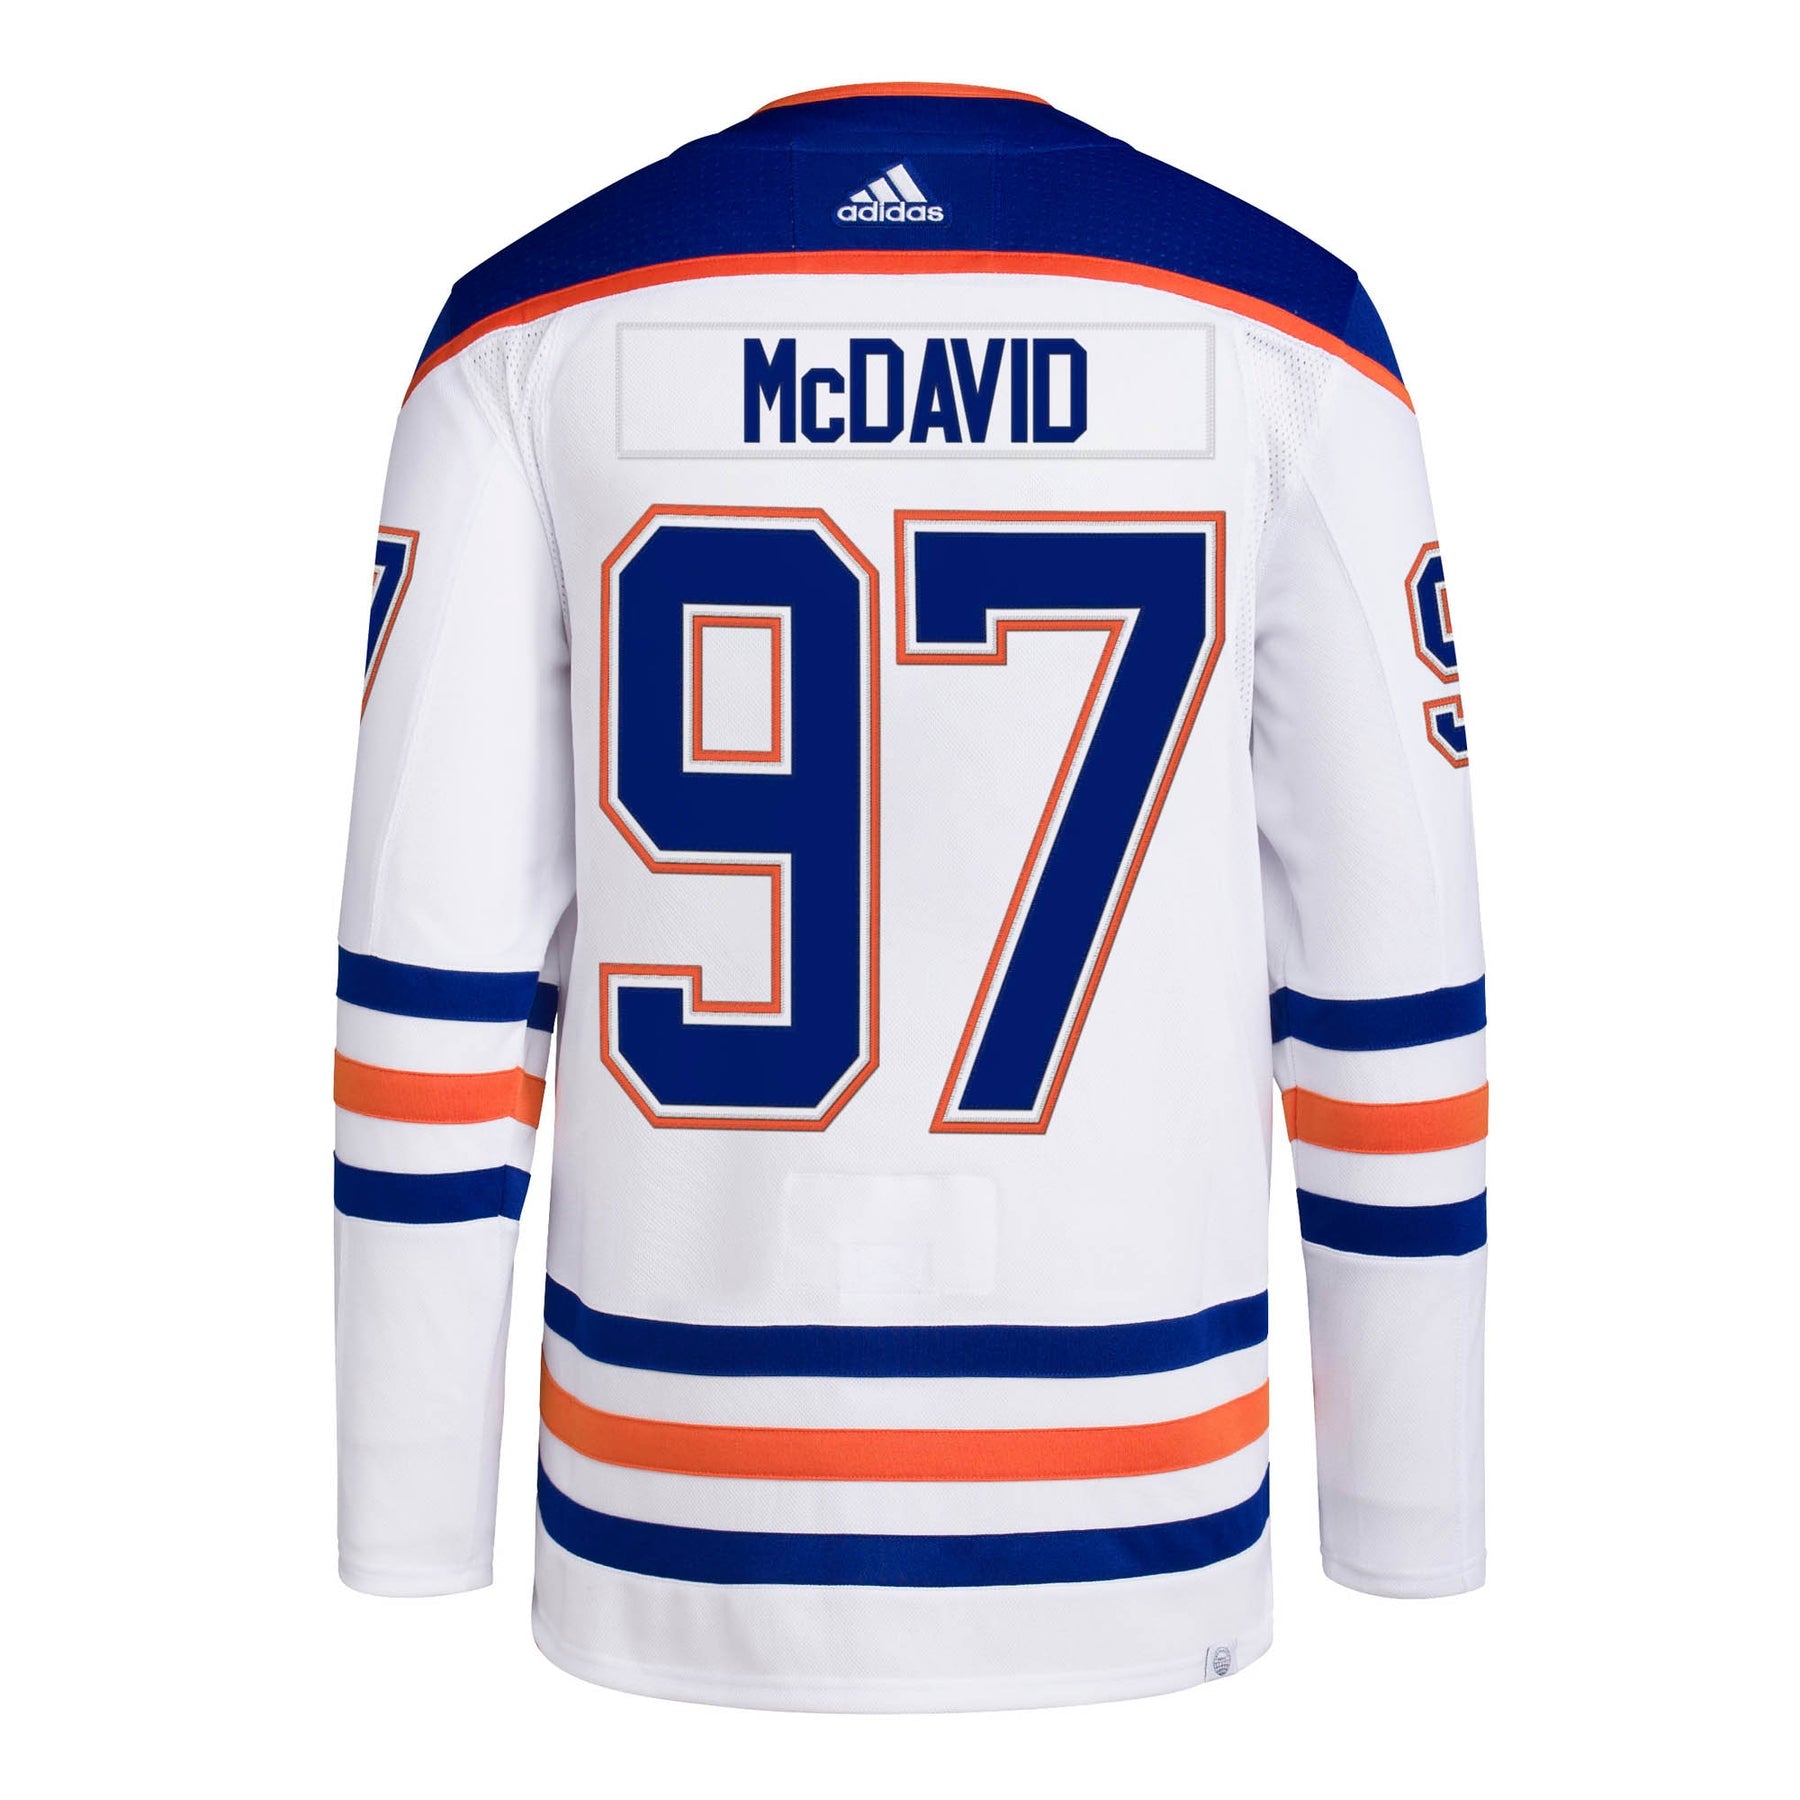 Youth Edmonton Oilers Connor McDavid Jersey Stitched Kids Connor